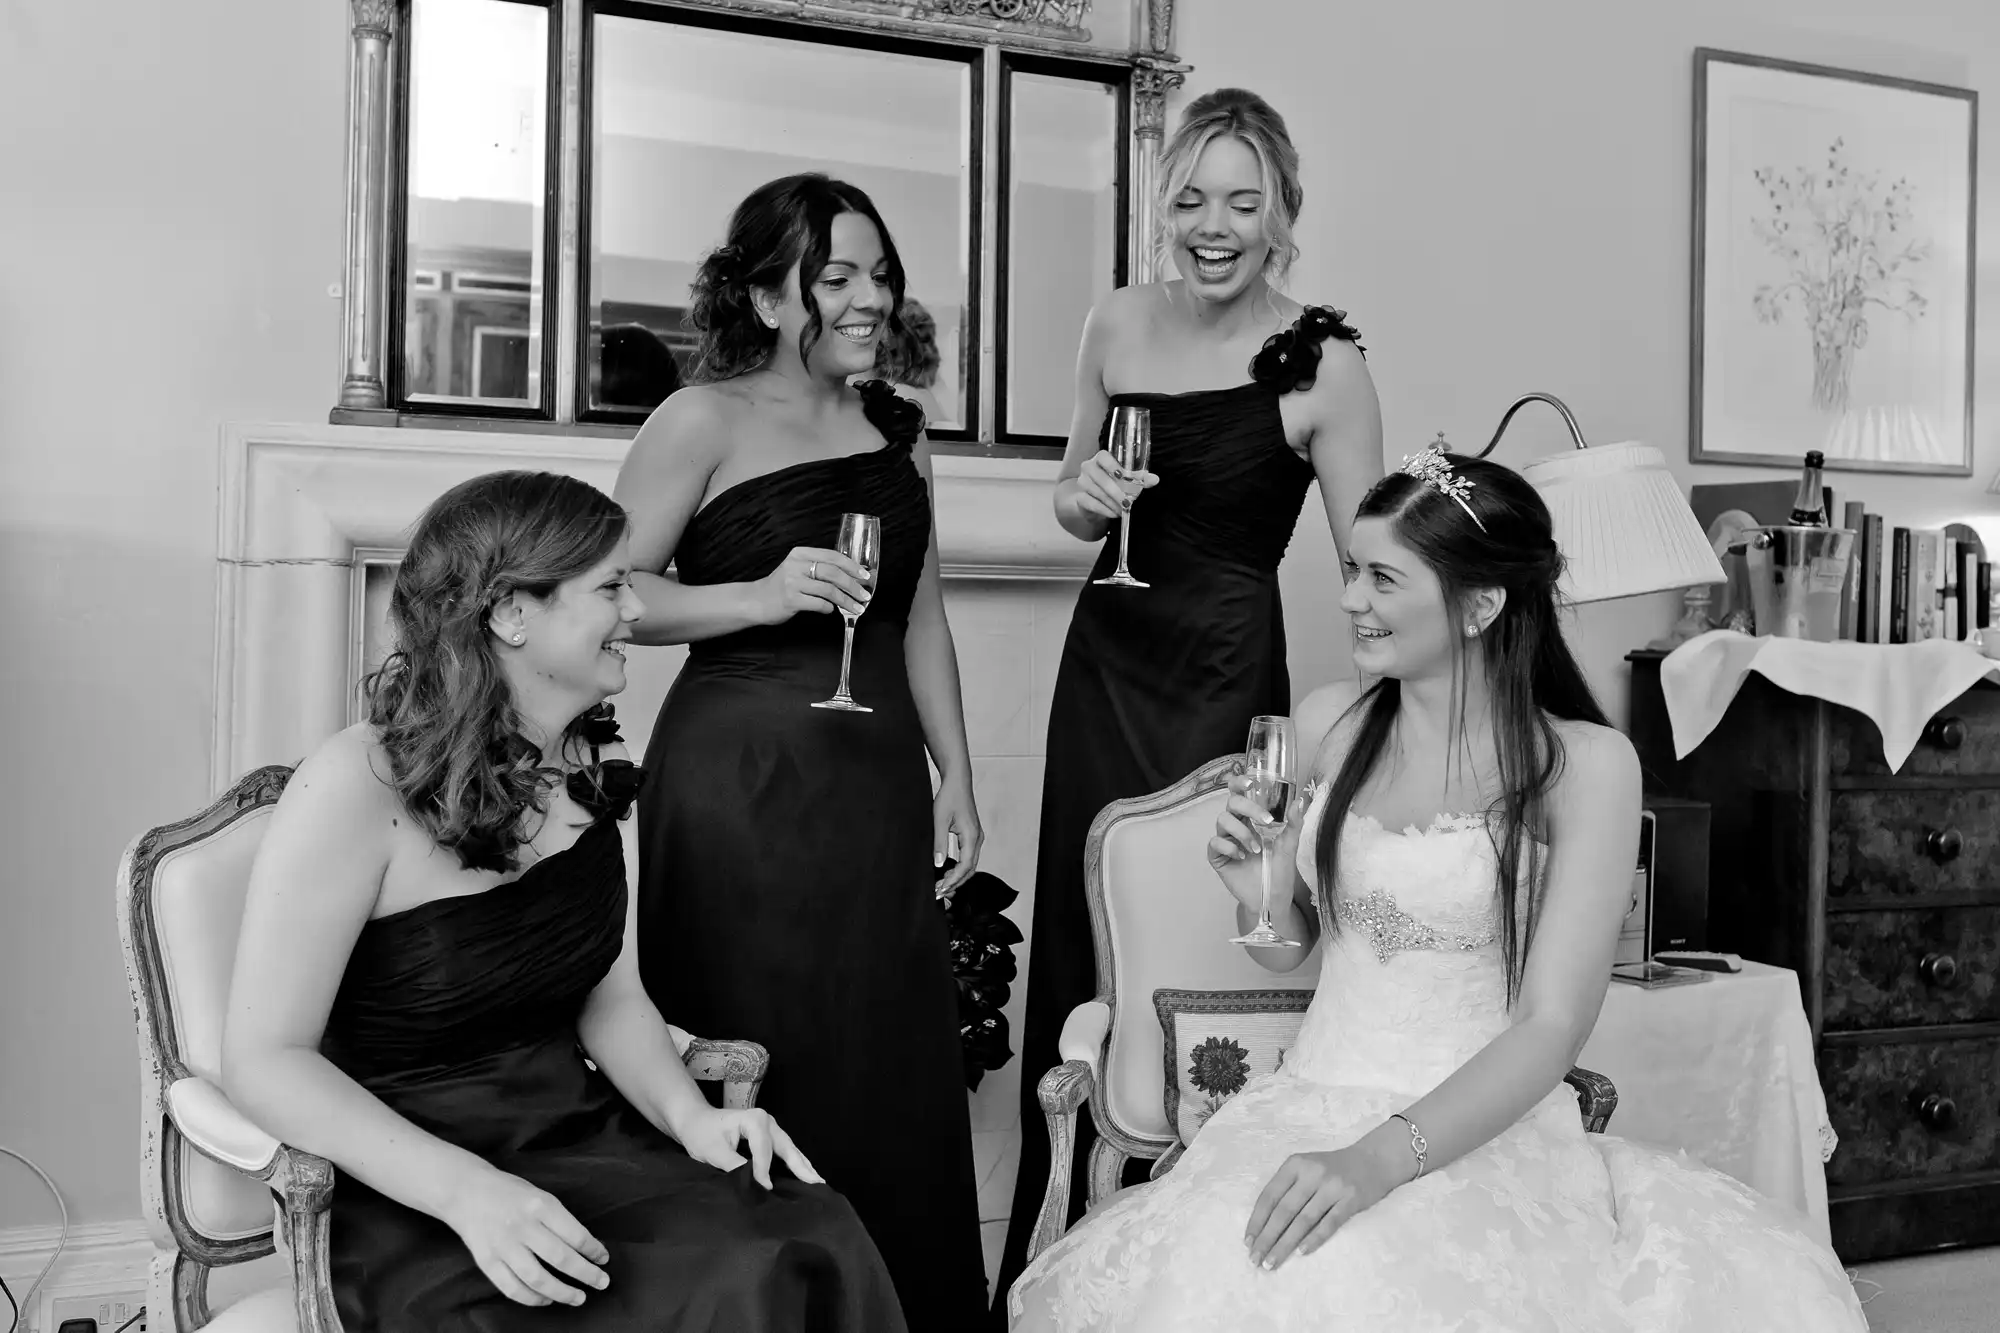 Four women in elegant dresses, one in a bridal gown, cheerfully chatting and holding champagne glasses in a room with a vintage dresser.